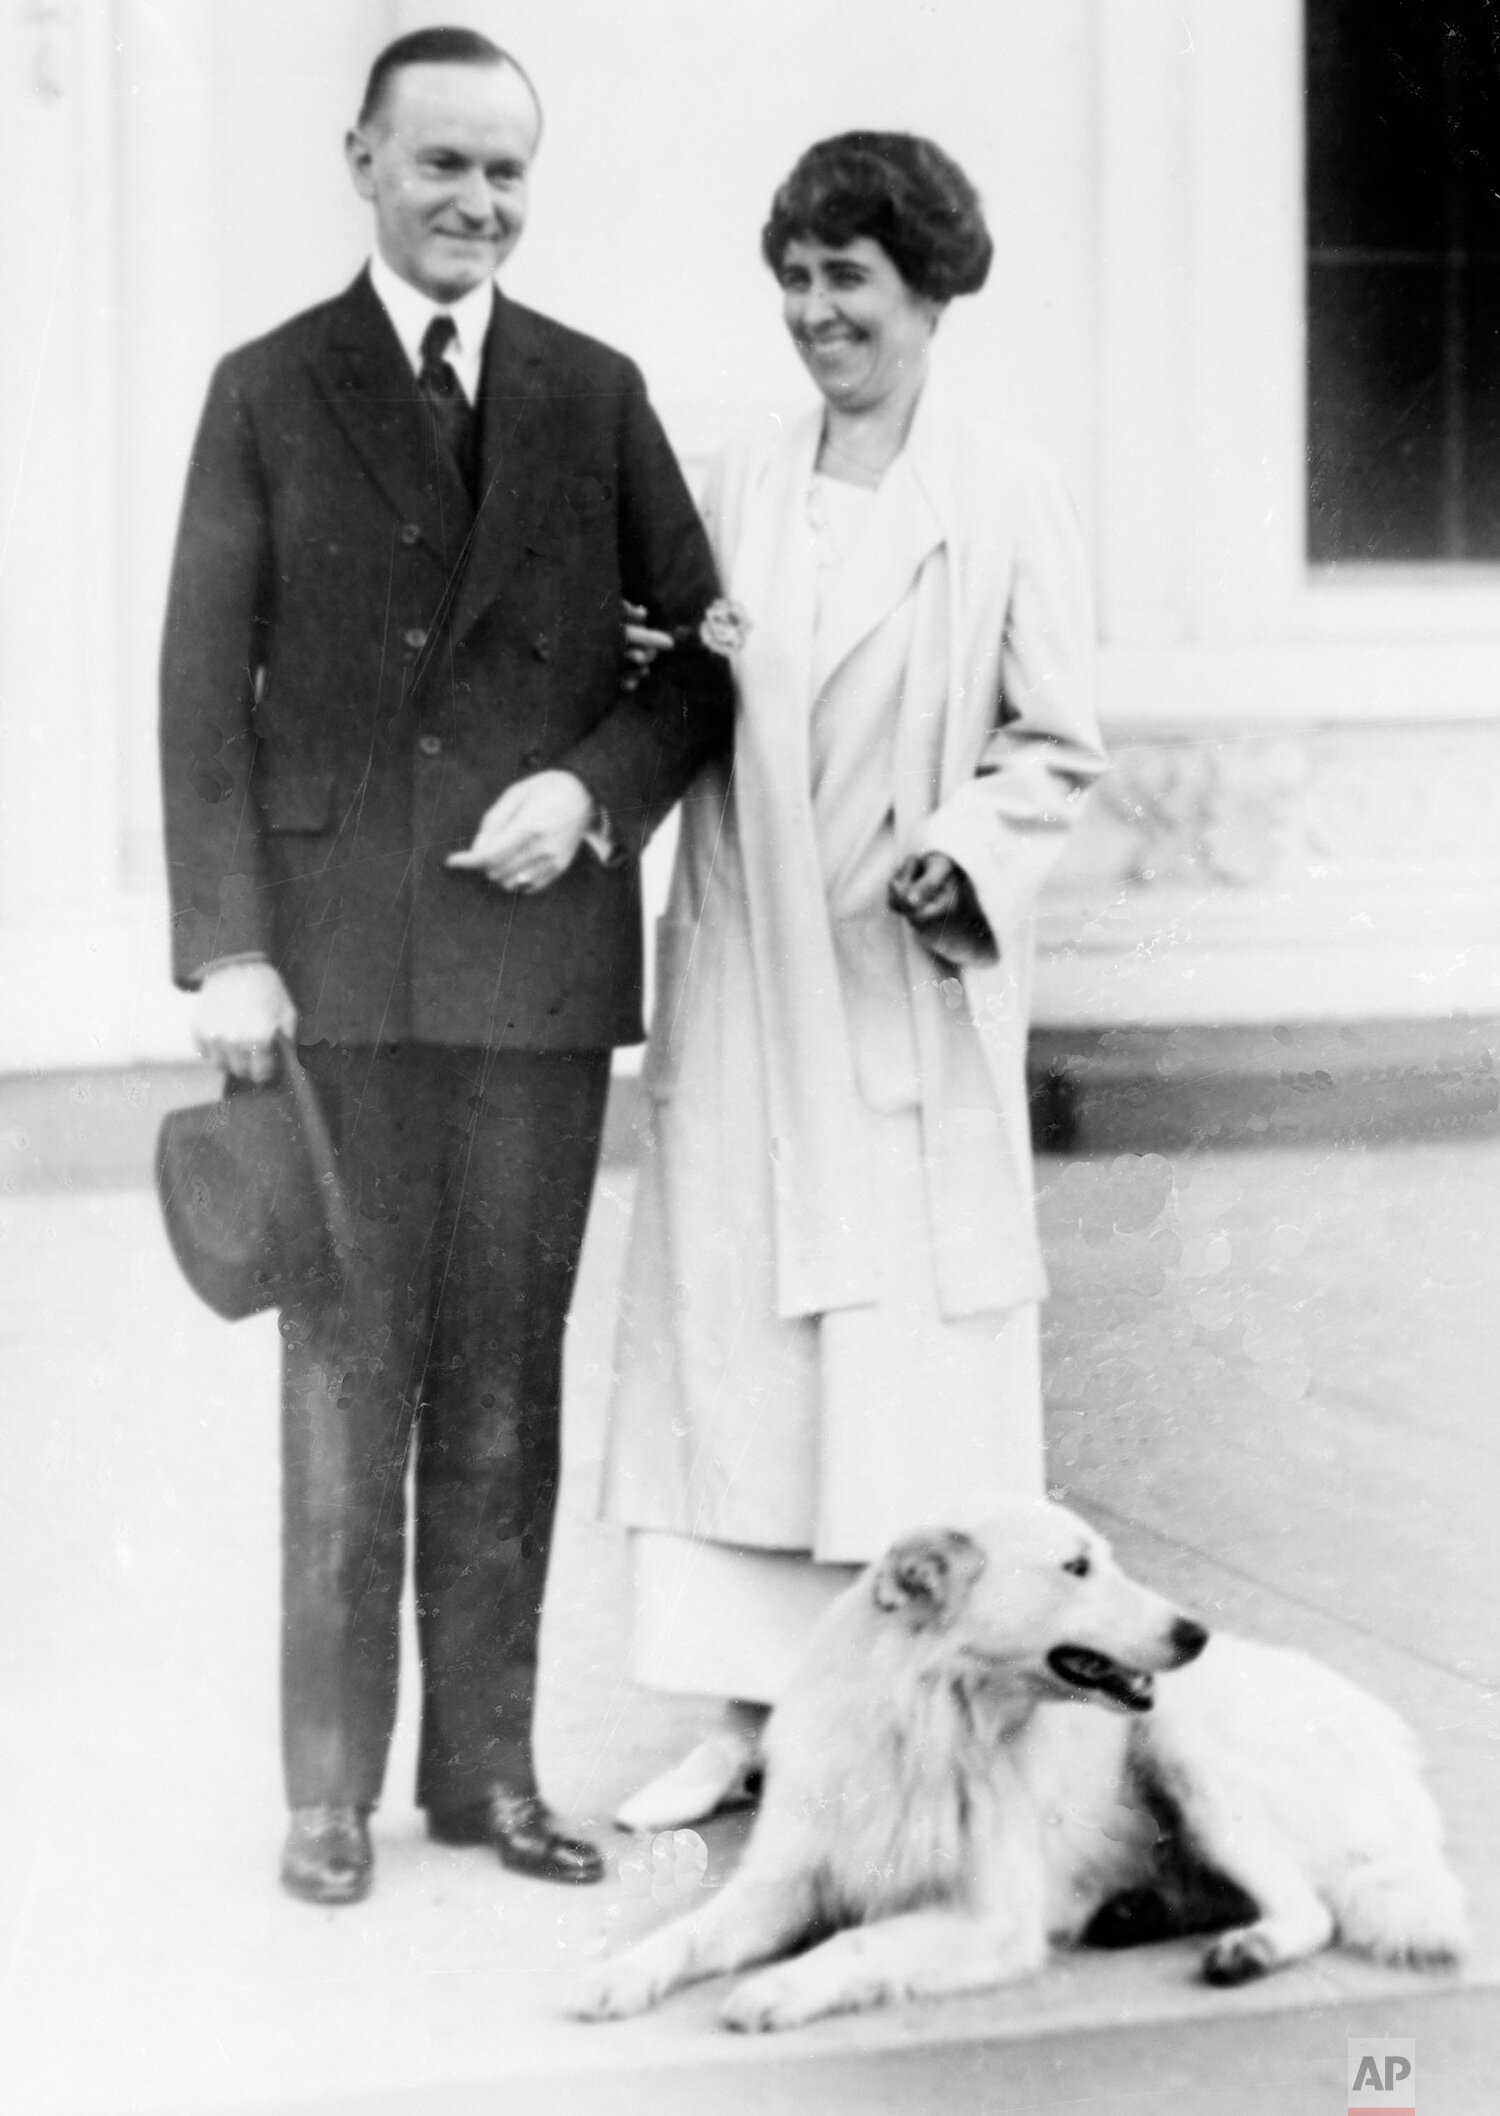  U.S. President Calvin Coolidge and first lady Grace Coolidge are shown with their dog at the White House portico in Washington, D.C., on Nov. 5, 1924.  (AP Photo) 